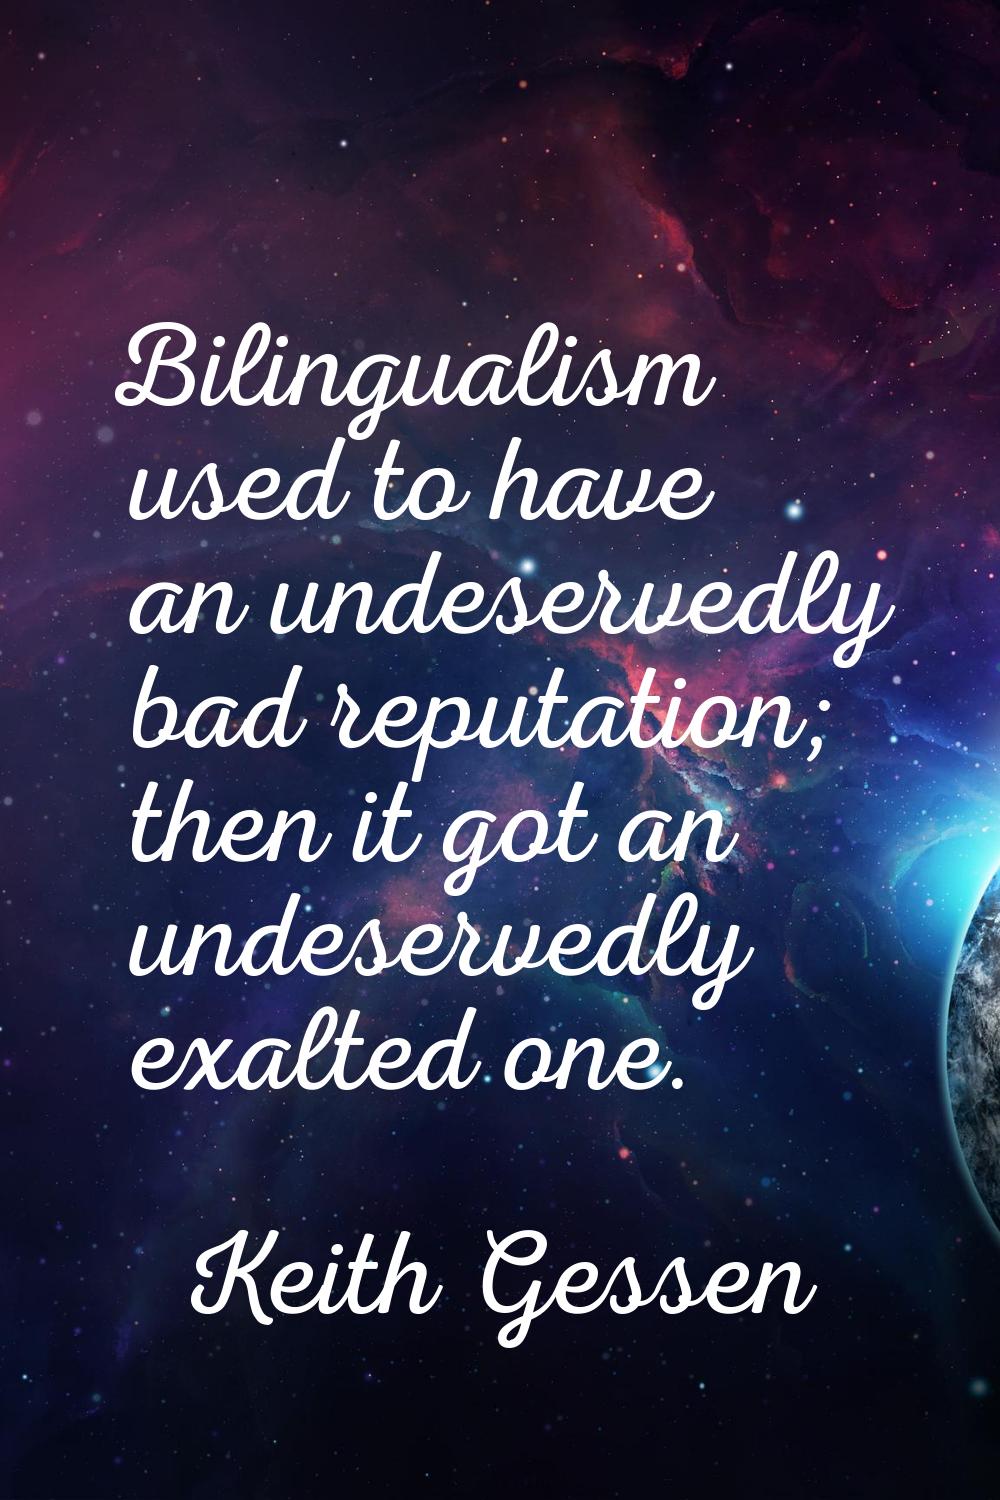 Bilingualism used to have an undeservedly bad reputation; then it got an undeservedly exalted one.